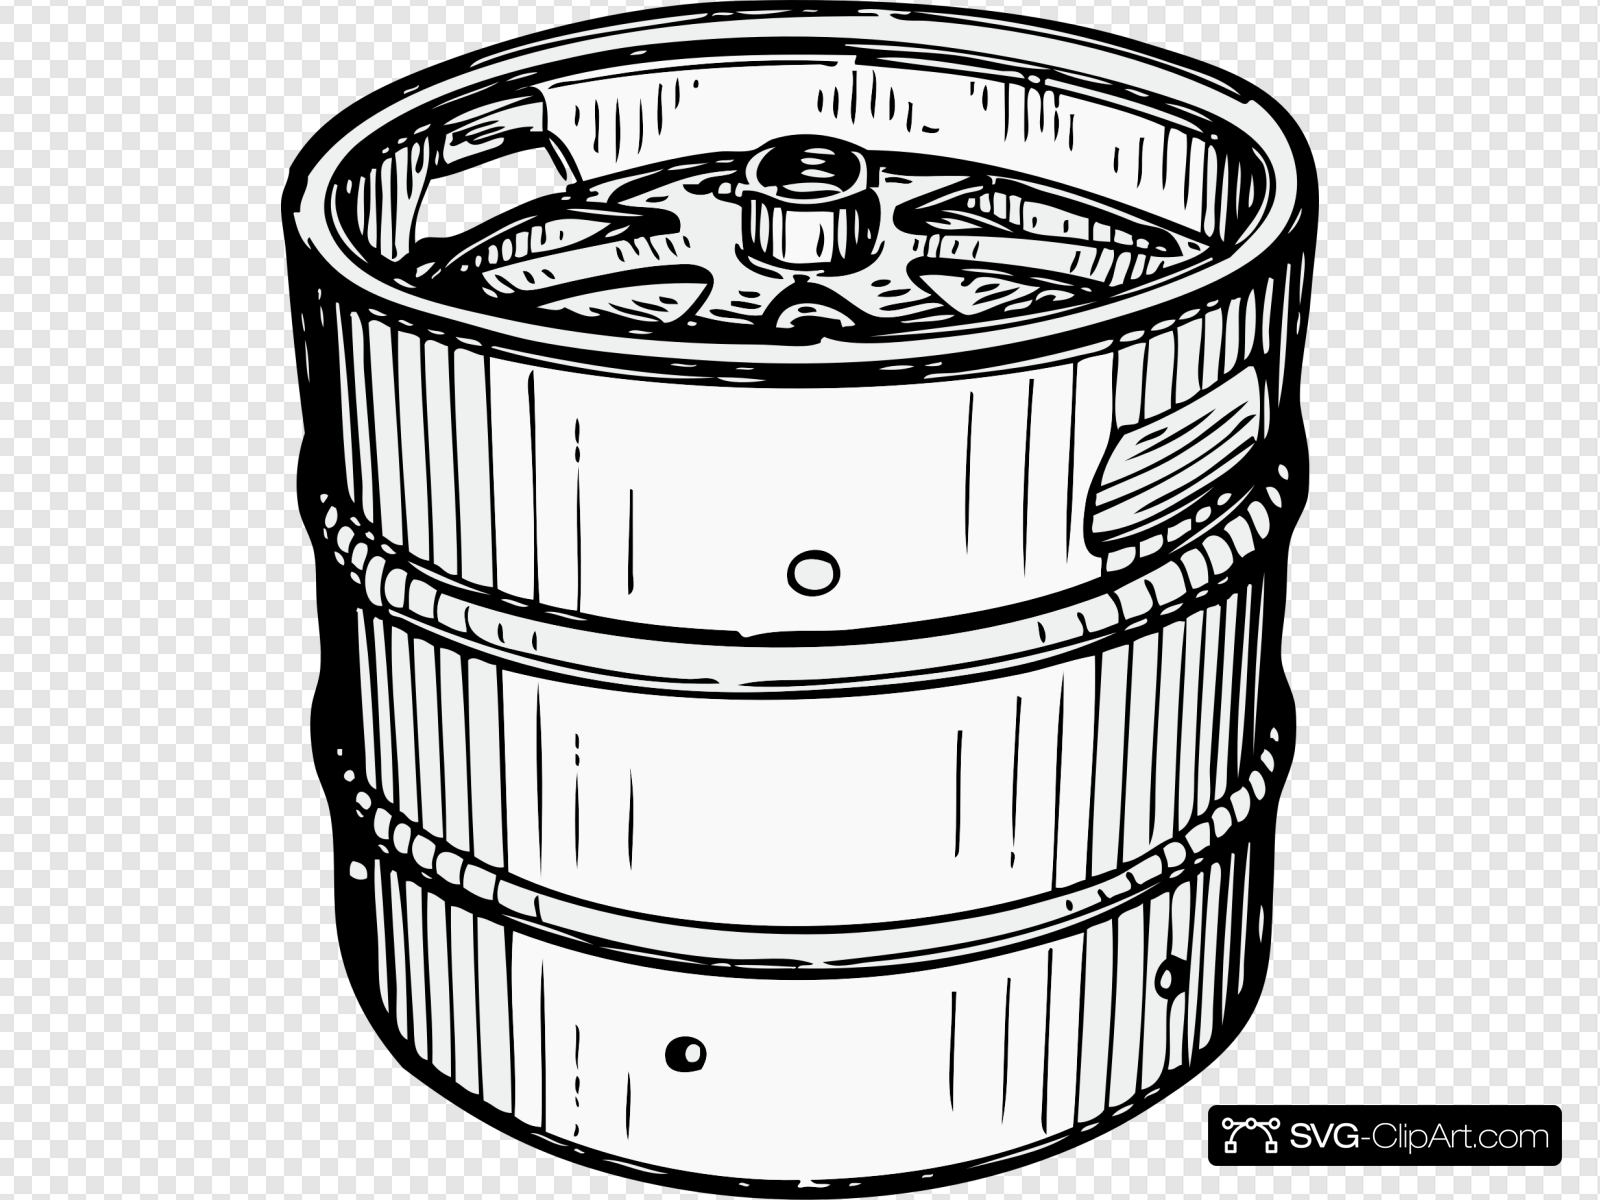 Beer Keg Clip art, Icon and SVG.